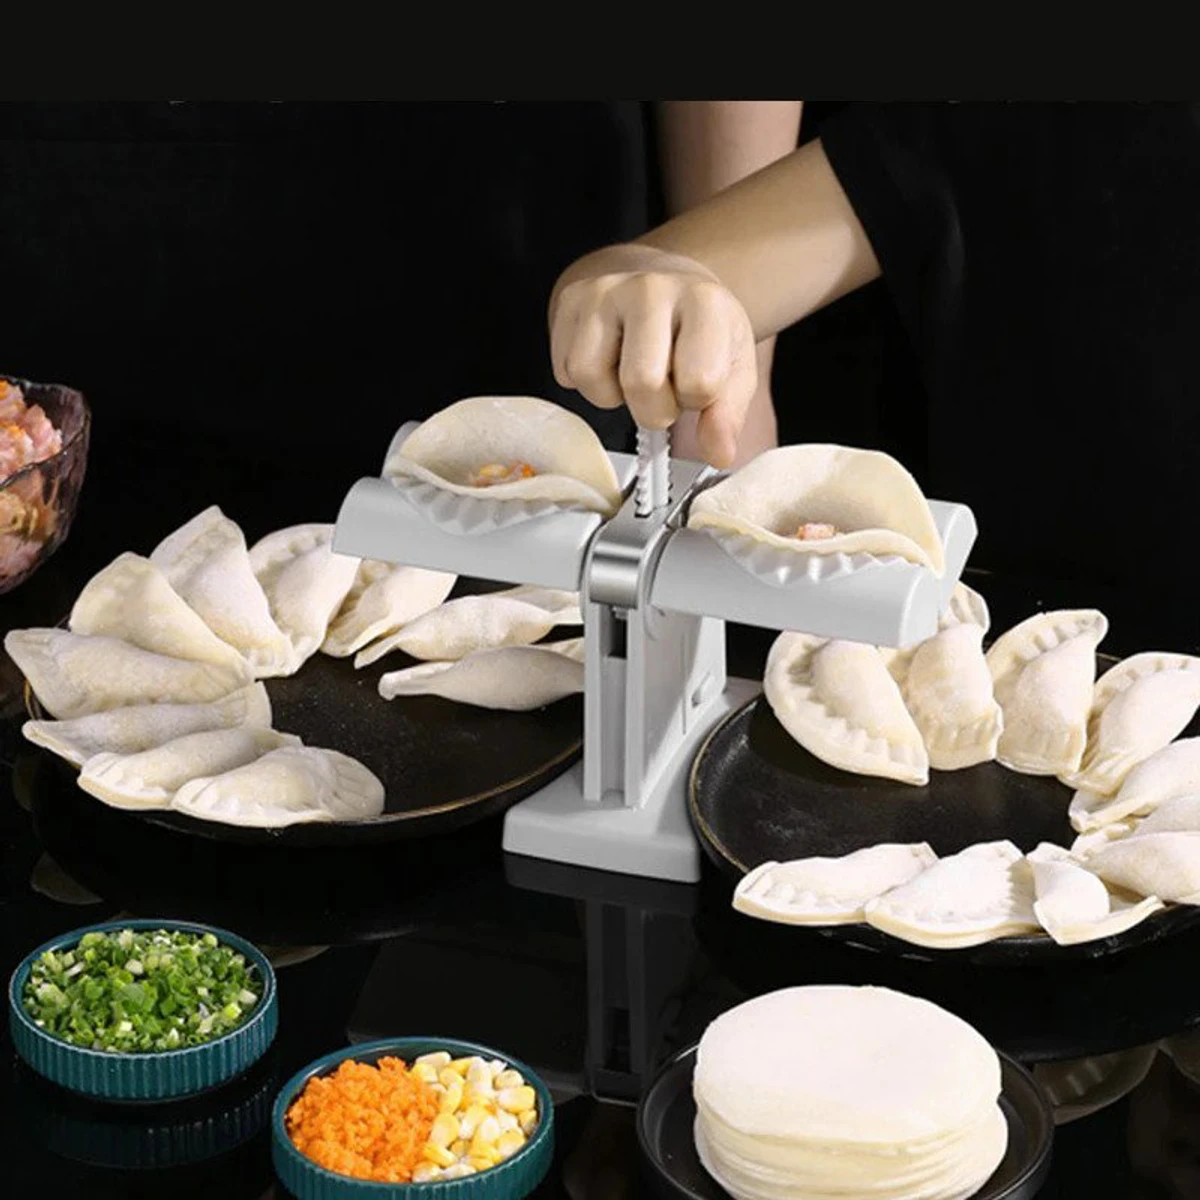 Dumpling Maker Machine, Household Double Head Automatic Dumpling Maker Mould, Dumpling Wrapper Press Mold, Wrap Two At A Time, Safety ABS material, Easy-tool for Dumpling Ravioli, Kitchen Gadgets